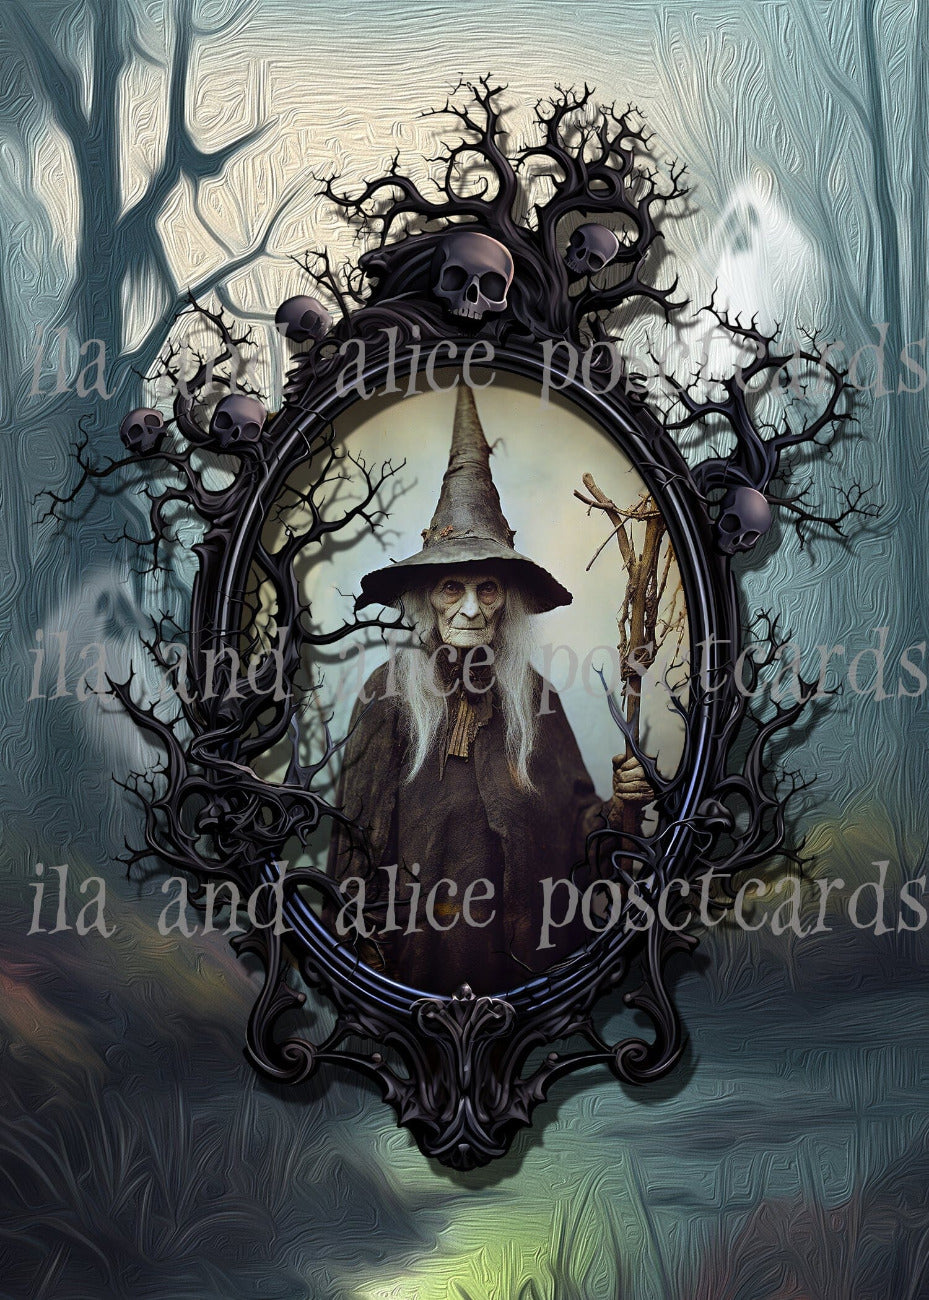 Witches in a Dark Forest Halloween Postcards Post Cards ila & alice 